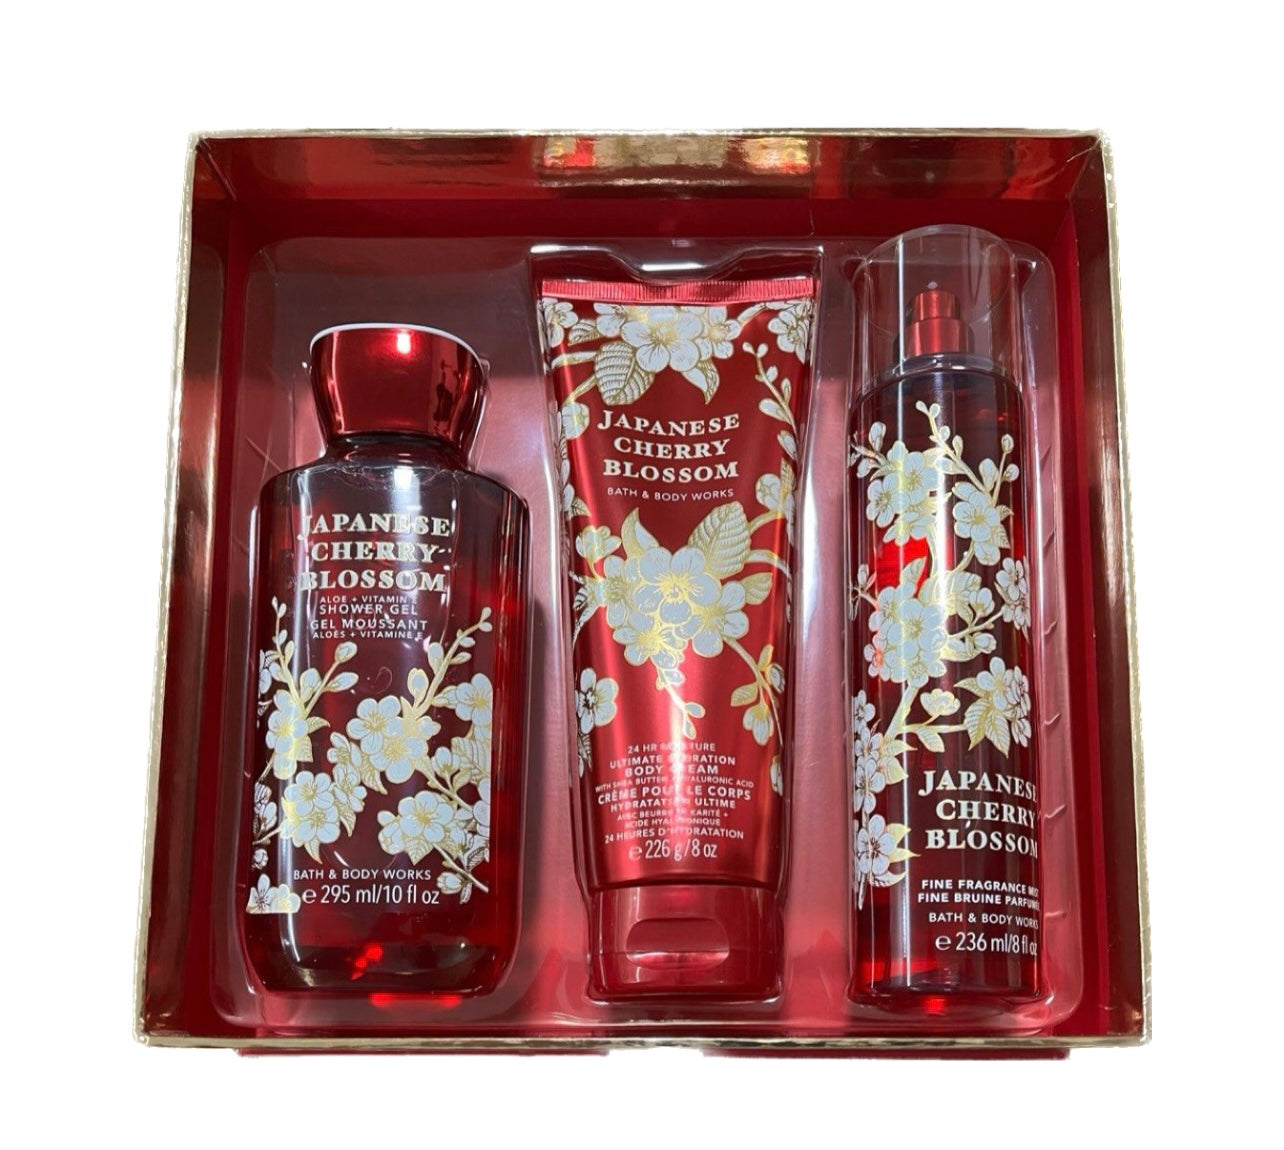 BATH AND BODY WORKS JAPANESE CHERRY BLOSSOM ket